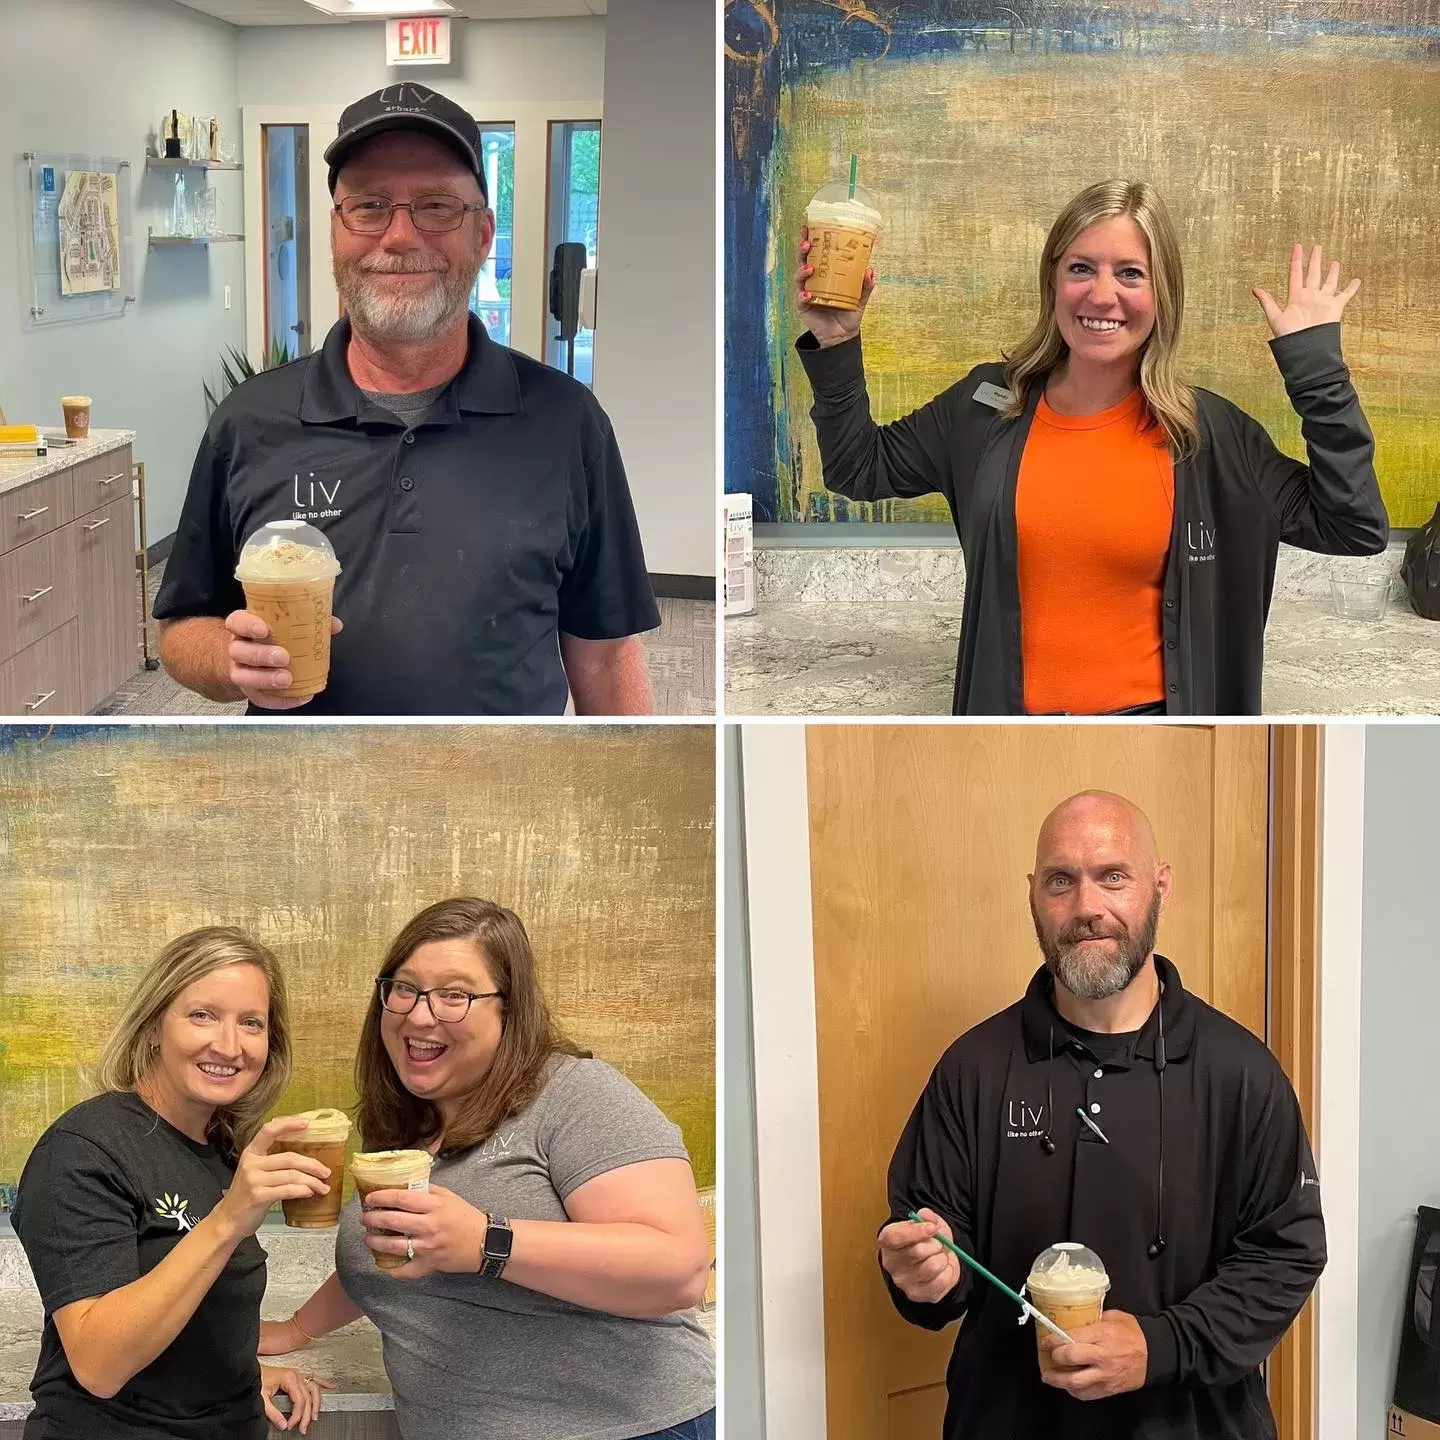 Hooray, it’s Pumpkin Spice Latte release day! While (most of) our team isn’t quite ready to say goodbye to summer, we’re excited for the tastes of fall. Let us know in the comments below if you’re going to get a PSL today! 🎃

#LivForLattes #LivArbors #PSL #pumpkinspice